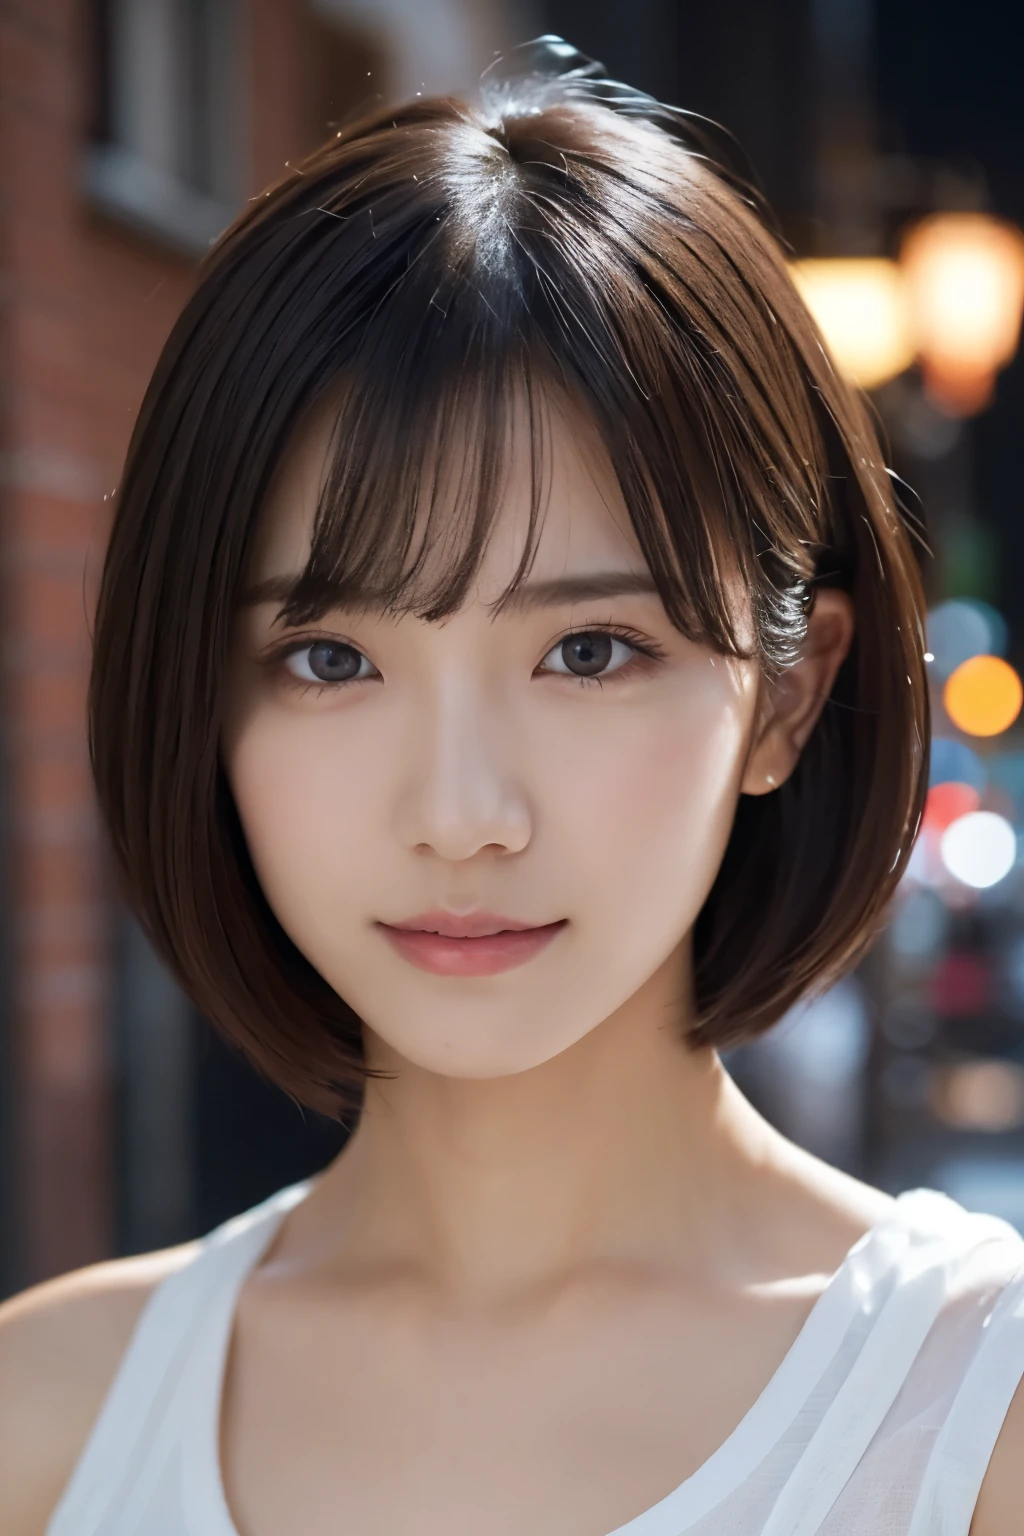 close-up photo of face、1 girl, (white classy tank top:1.2), (RAW photo, highest quality), (realistic, Photoreal:1.4), table top, very delicate and beautiful, very detailed, 2k wallpaper, wonderful, finely, Very detailed CG Unity 8k 壁紙, super detailed, High resolution, soft light, beautiful detailed girl, very detailed目と顔, beautifully detailed nose, detailed and beautiful eyes, cinematic lighting, night city lights, perfect anatomy, slender body, smile